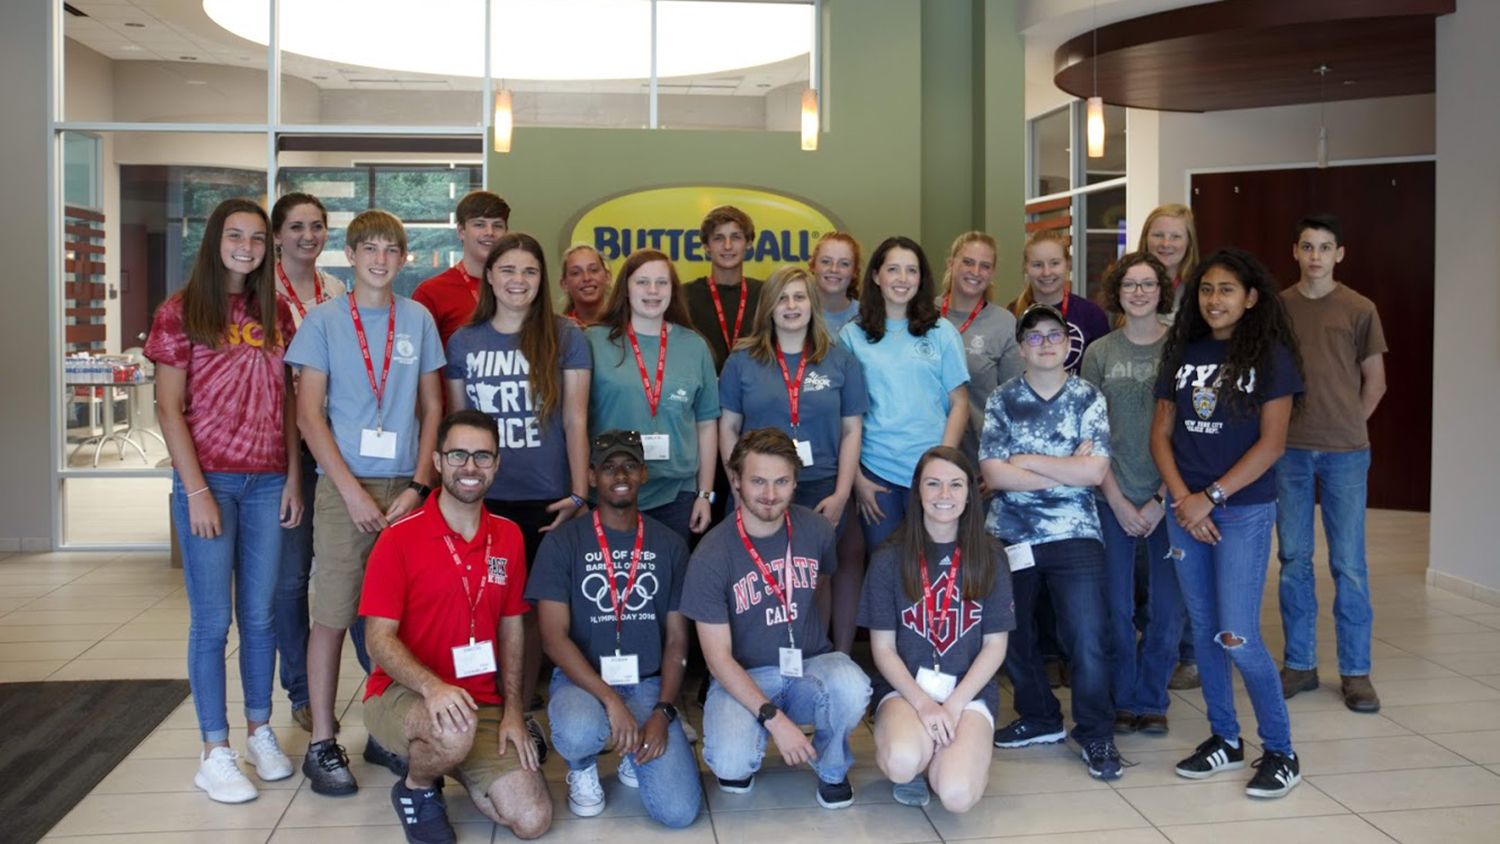 students tour Butterball headquarters